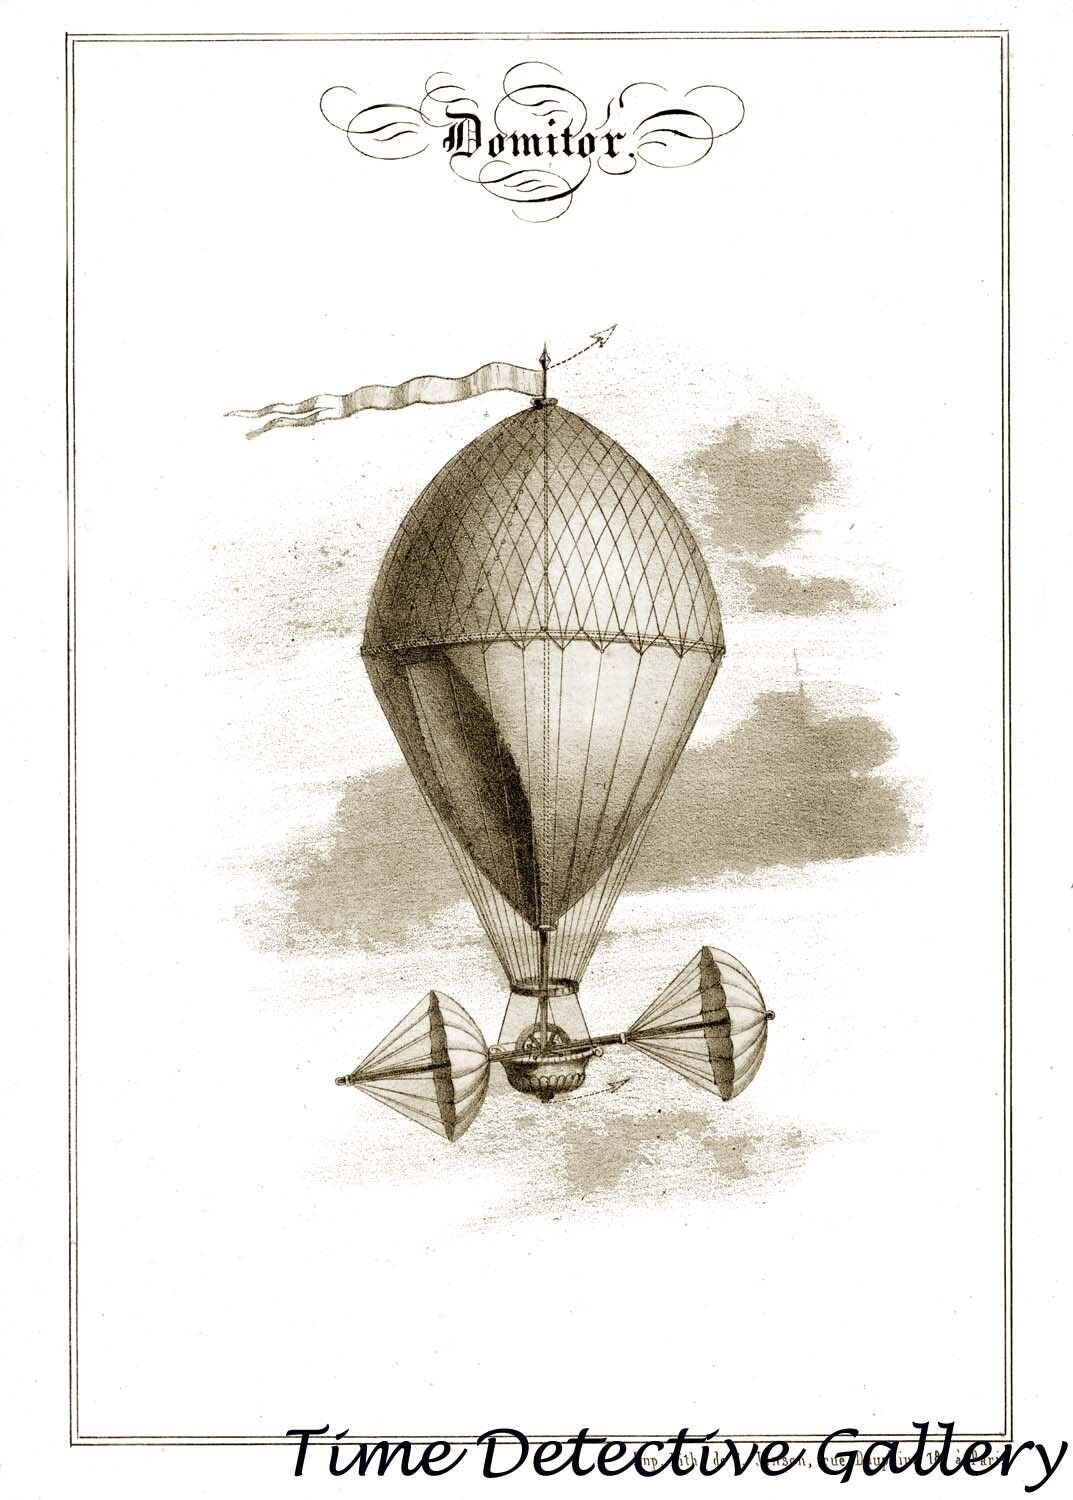 Illustration of a Domitor Balloon - 1852 - Historic Lithograph Print